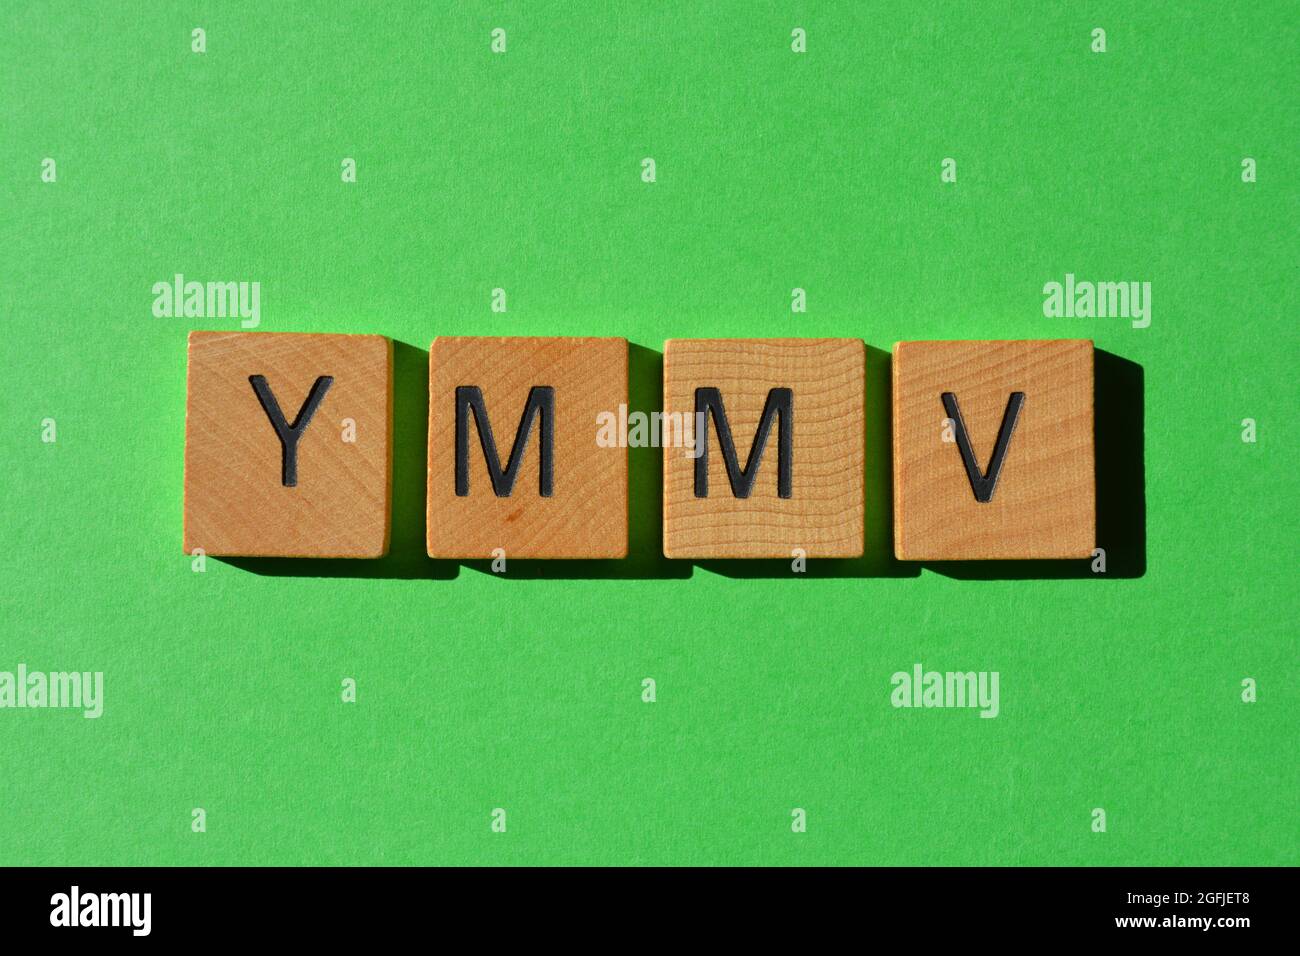 YMMV, Acronym for Your Mileage May Vary, in wooden alphabet letters isolated on green background Stock Photo